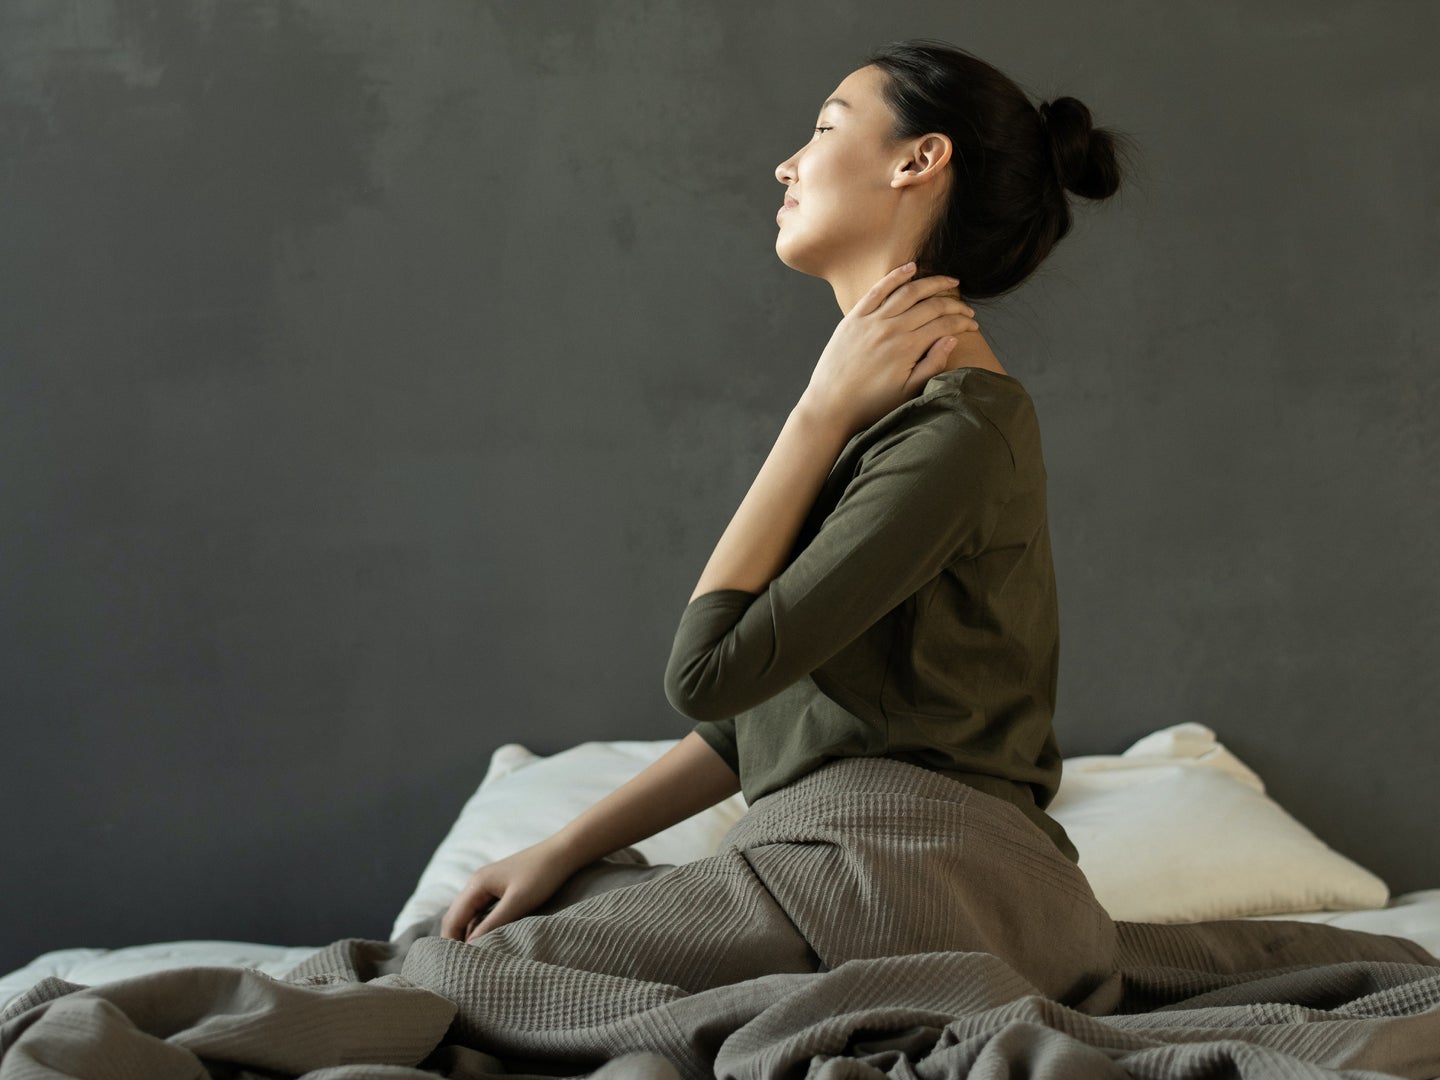 A black-haired woman with her hair in a bun, sitting in bed with neck pain.